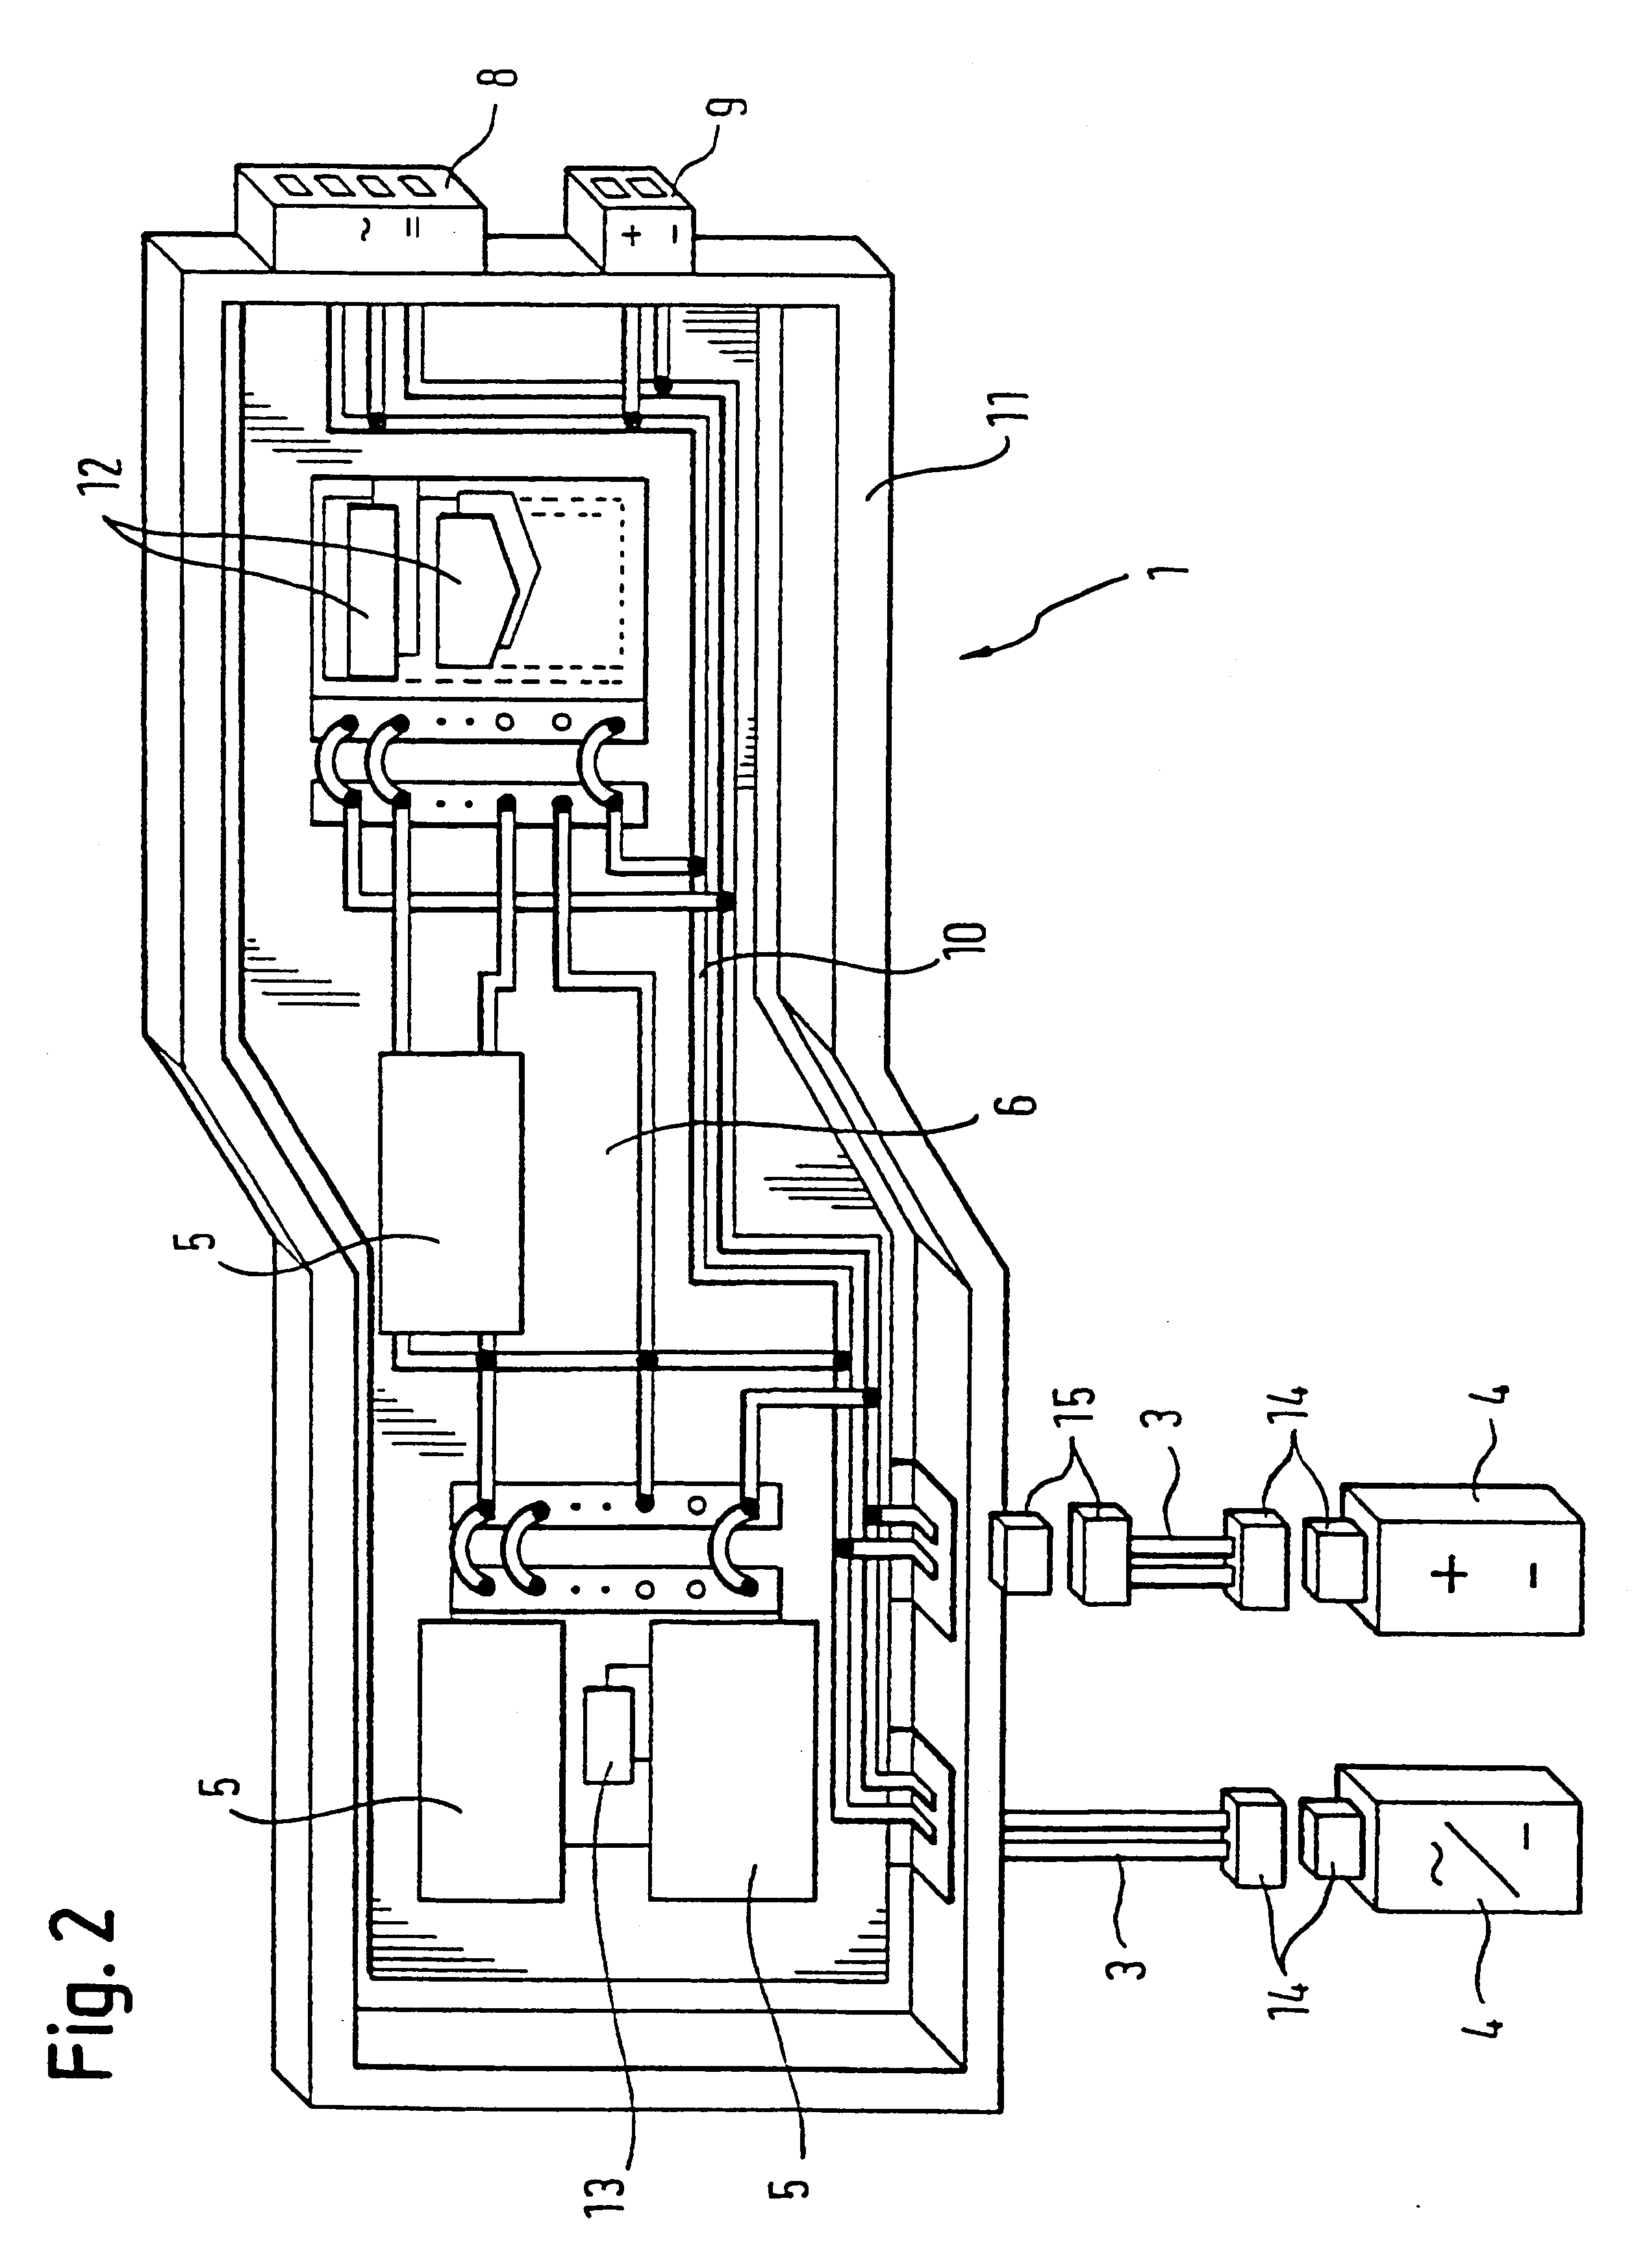 Electrical wiring system for the drive unit in vehicles